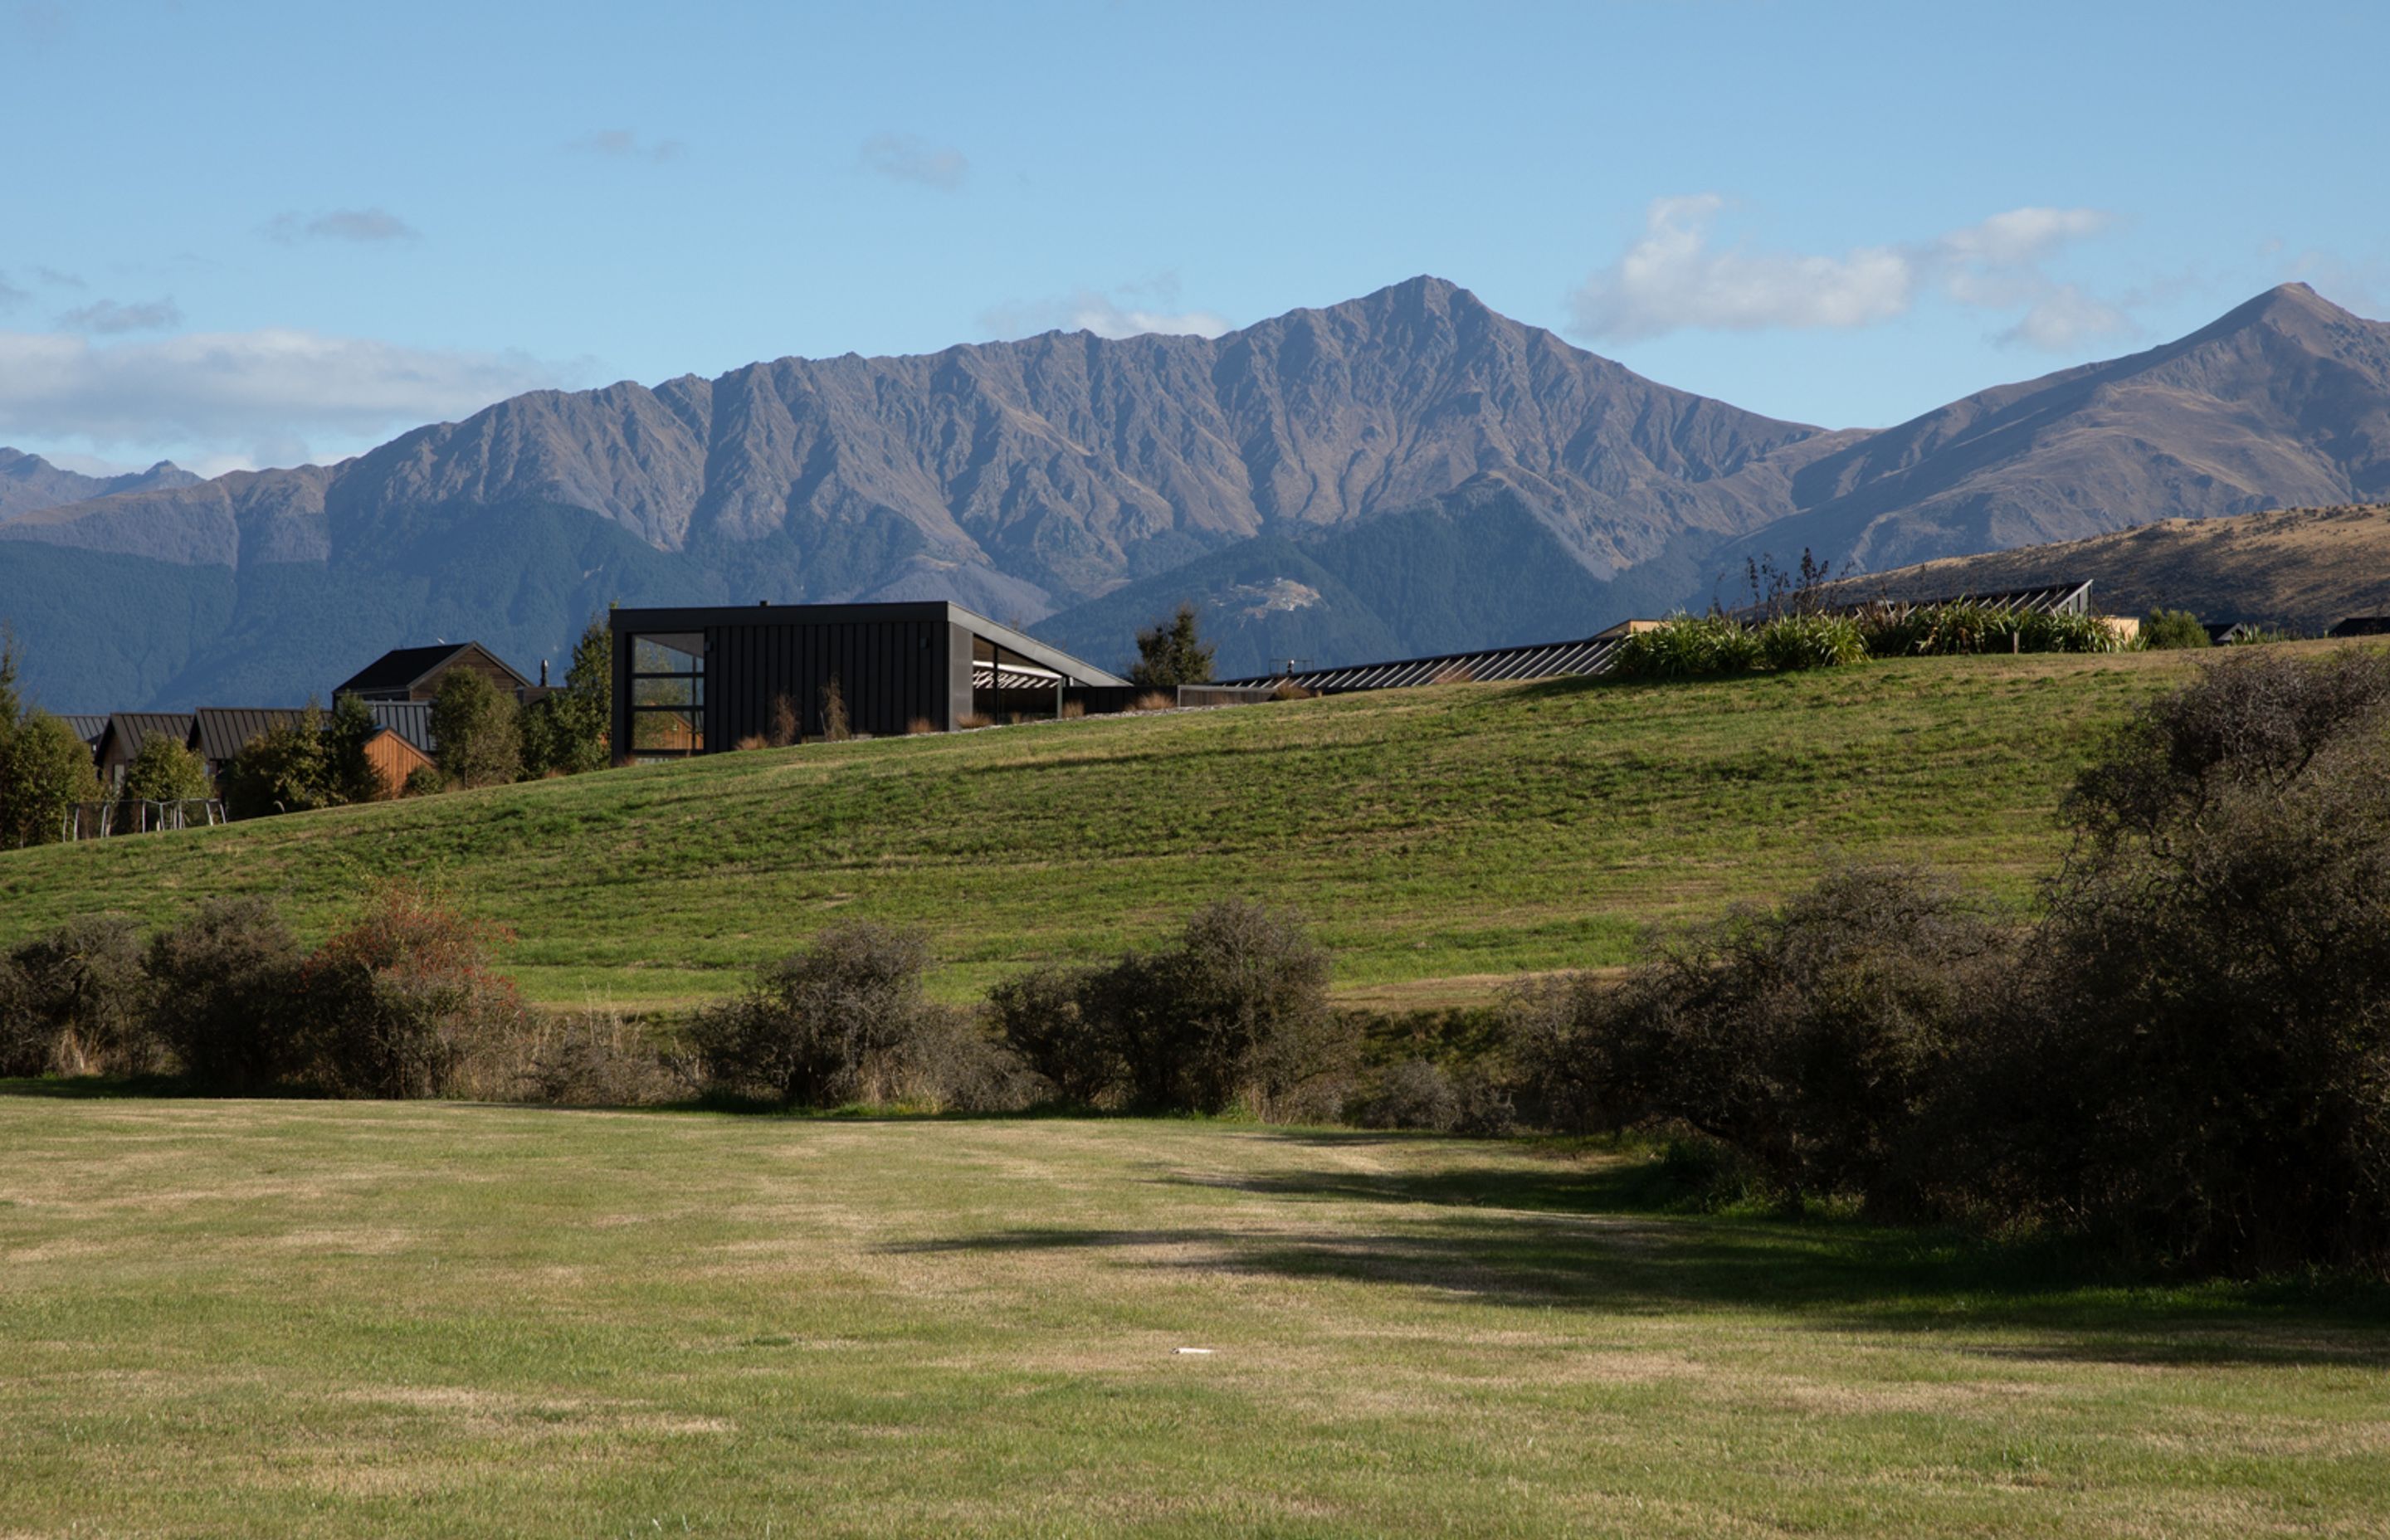 Located at the entrance of Jack's Point, Queenstown, Hill House is surrounded by mountain ranges.